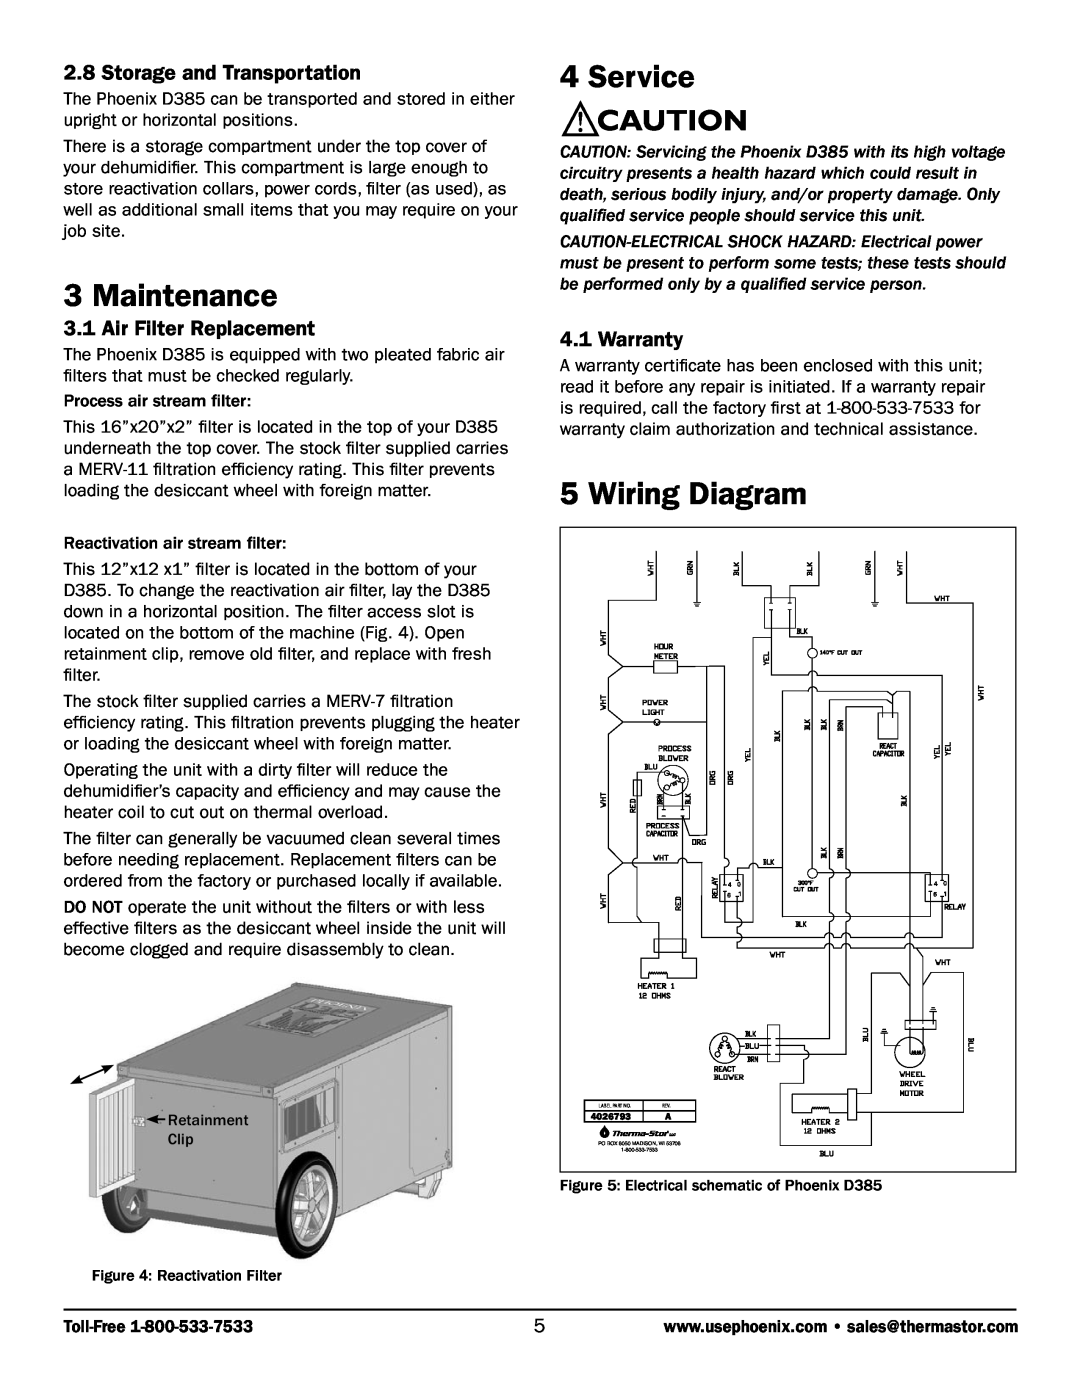 Therma-Stor Products Group D385 Maintenance, Service, Wiring Diagram, Storage and Transportation, Air Filter Replacement 